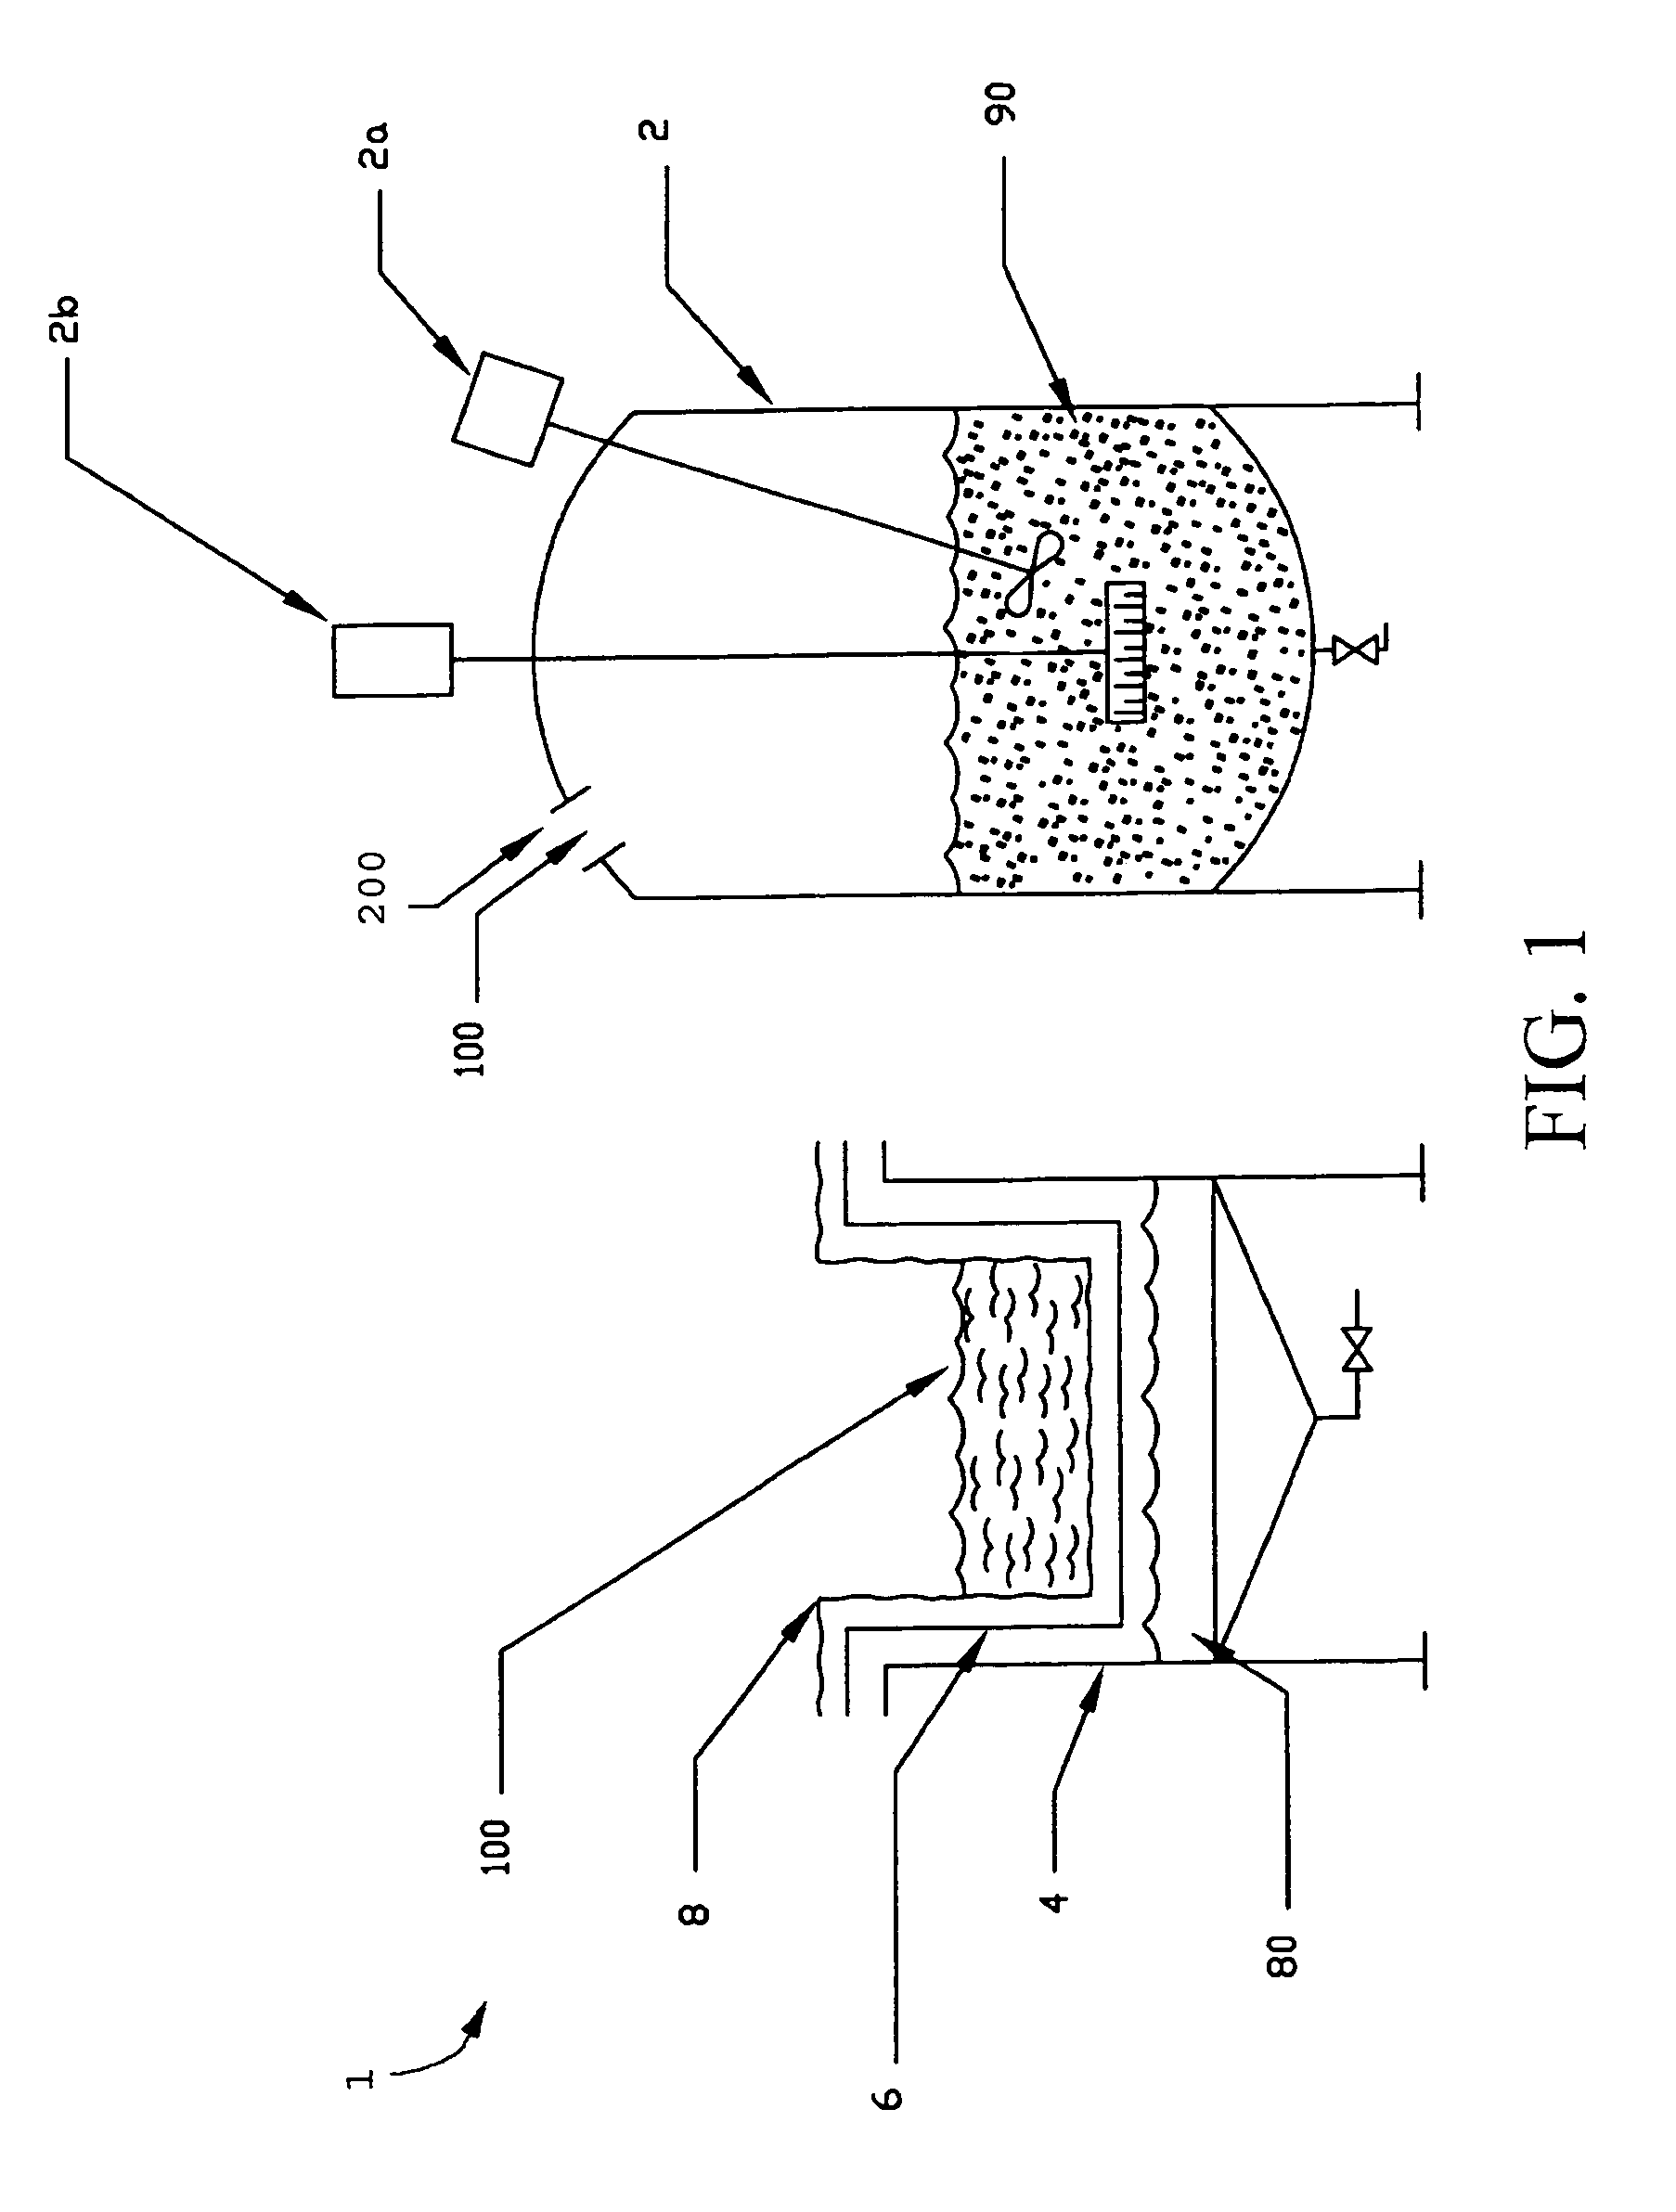 System for treating wastes using molten salt oxidation